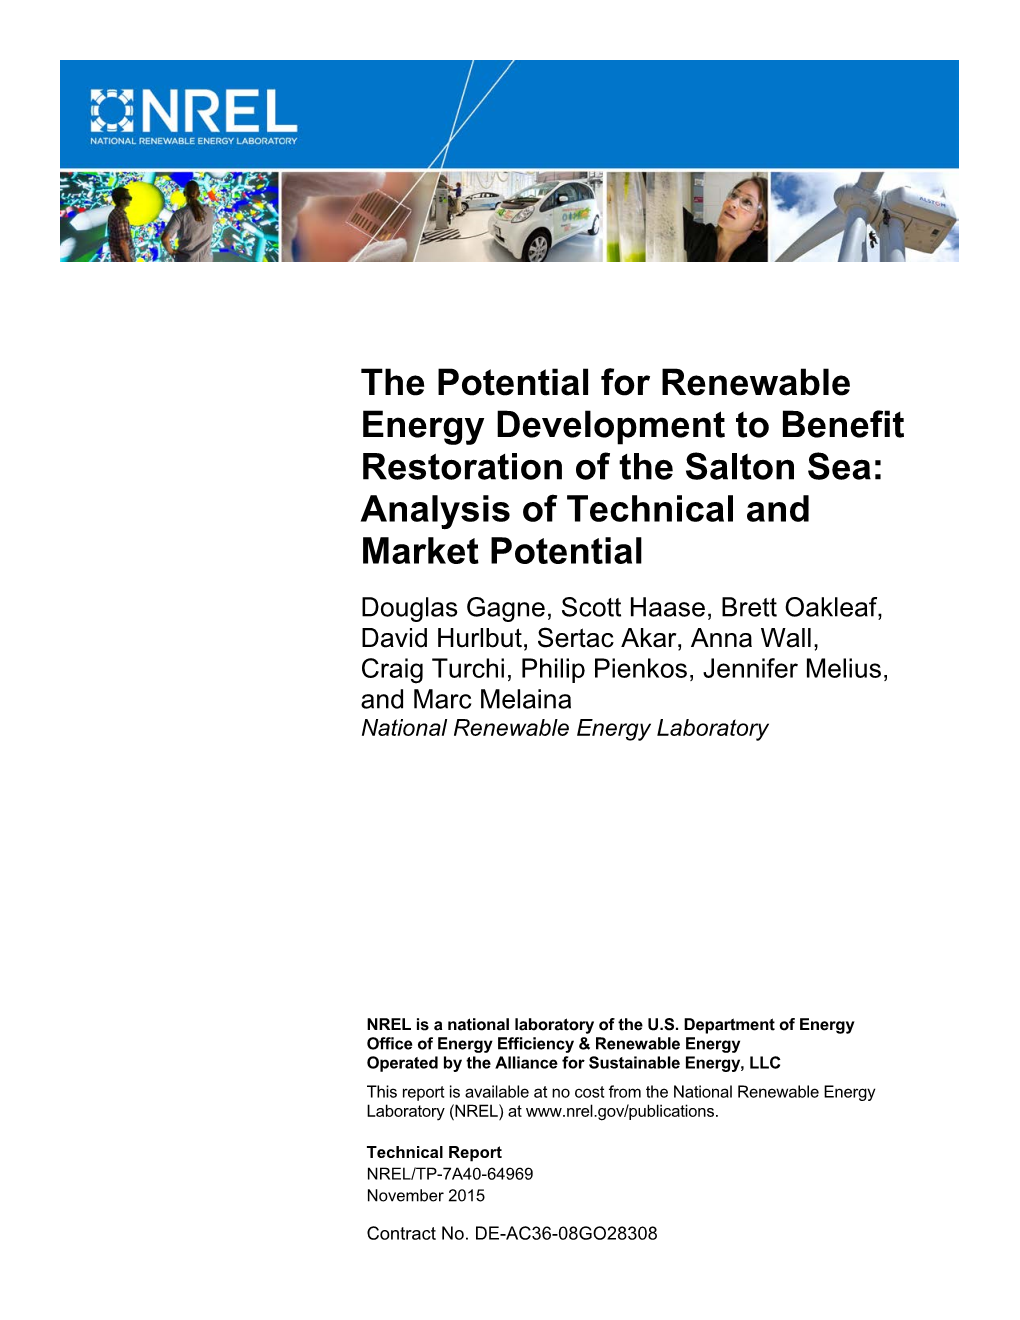 The Potential for Renewable Energy Development to Benefit Restoration